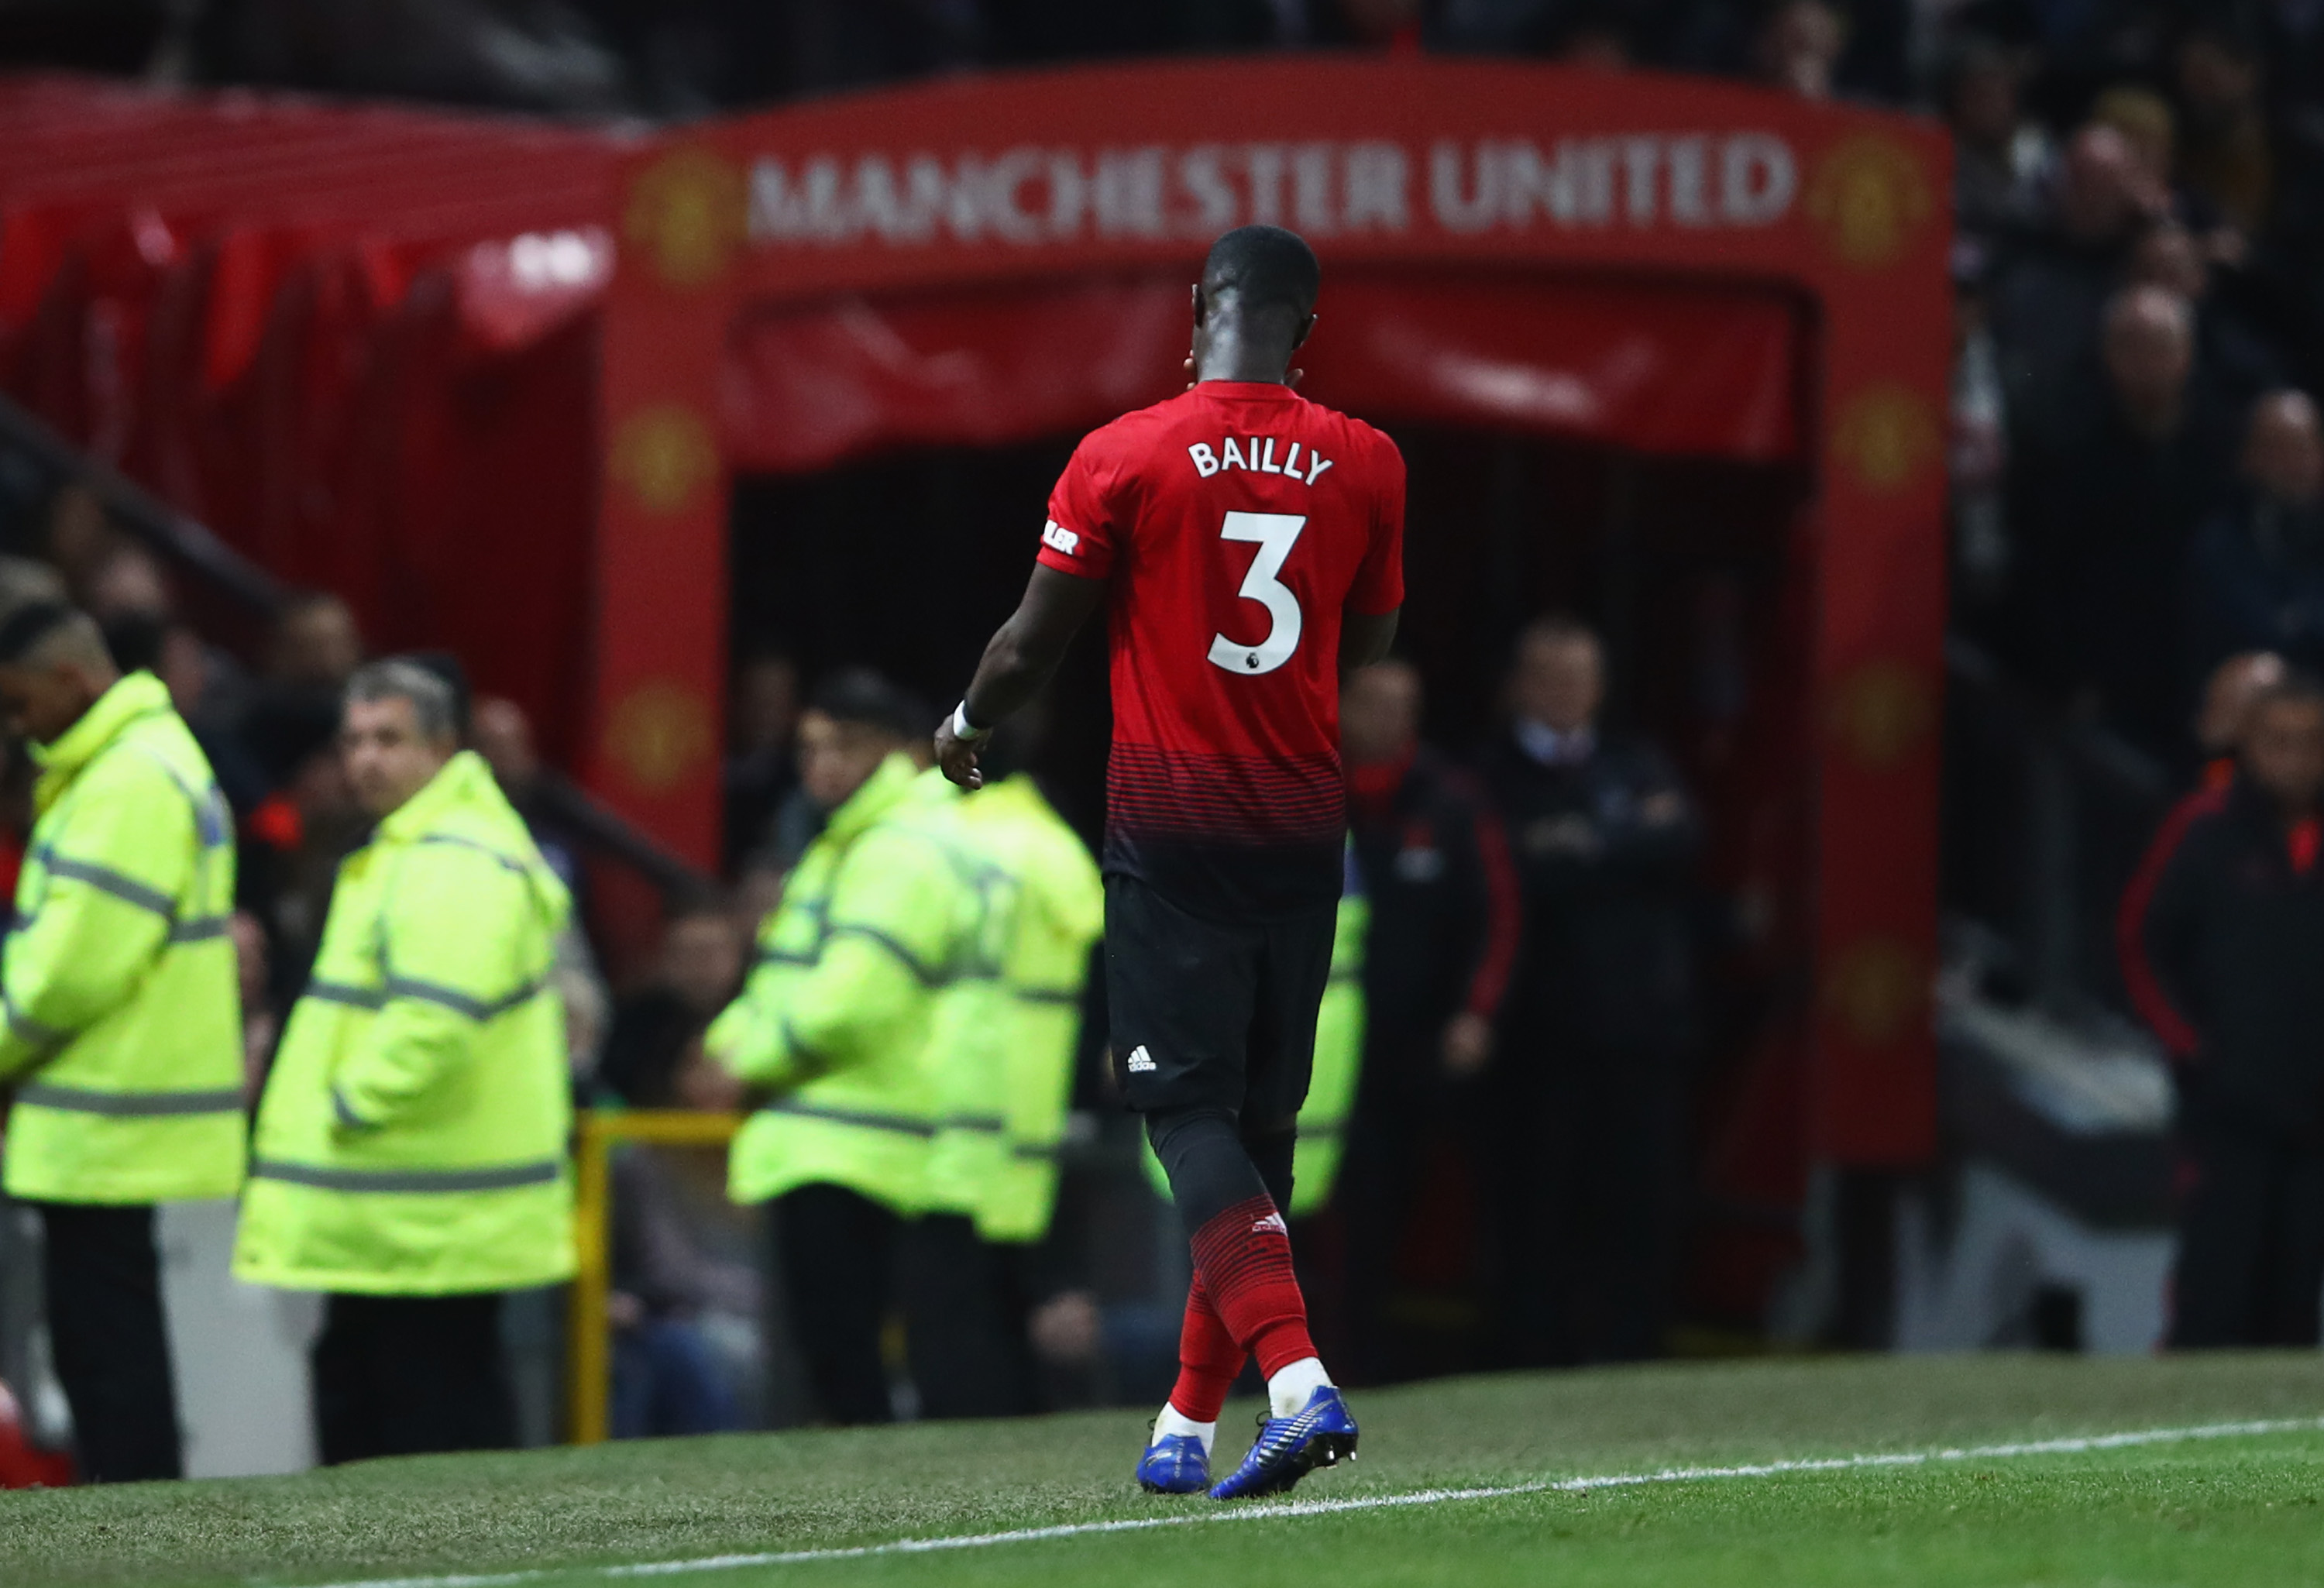 MANCHESTER, ENGLAND - DECEMBER 30: Eric Bailly of Manchester United (3) is shown a red card and is sent off during the Premier League match between Manchester United and AFC Bournemouth at Old Trafford on December 30, 2018 in Manchester, United Kingdom. (Photo by Clive Brunskill/Getty Images)